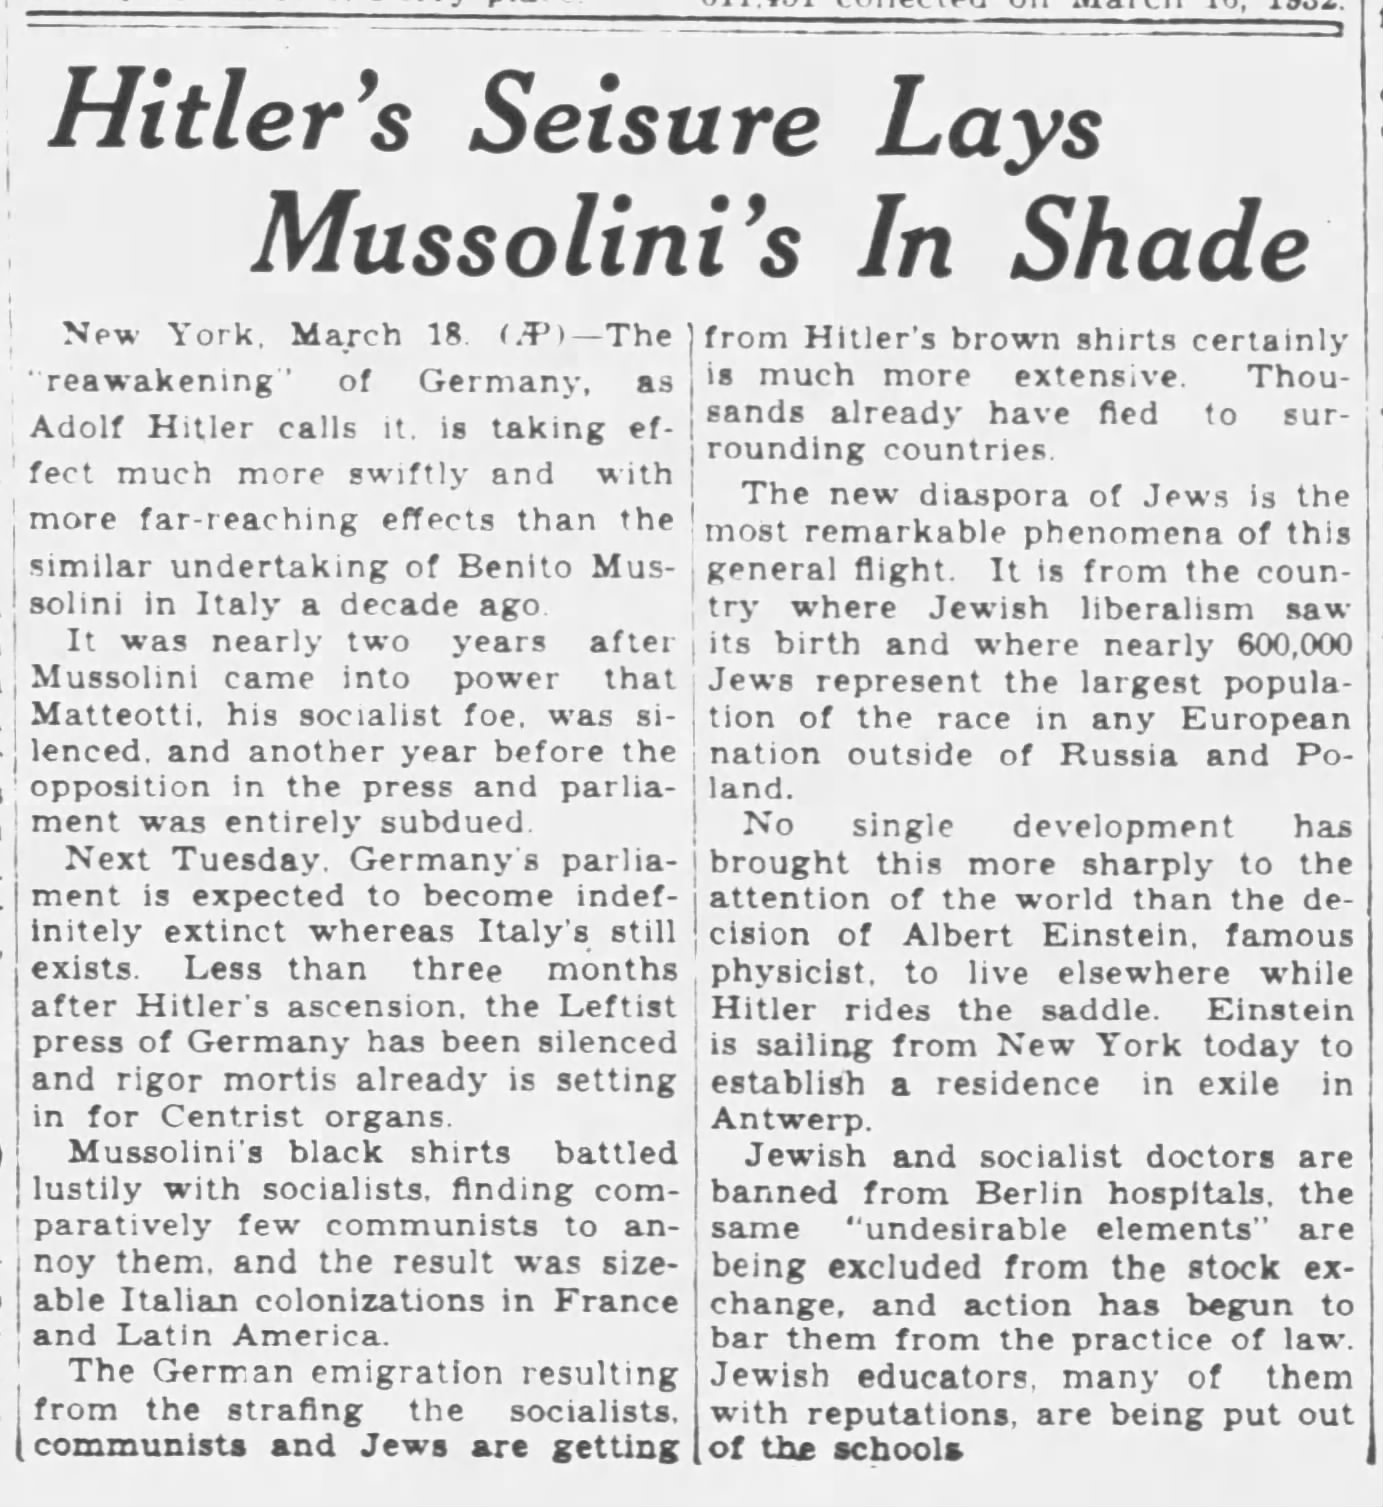 Hitler's Seisure [sic] Lays Mussolini's In Shade